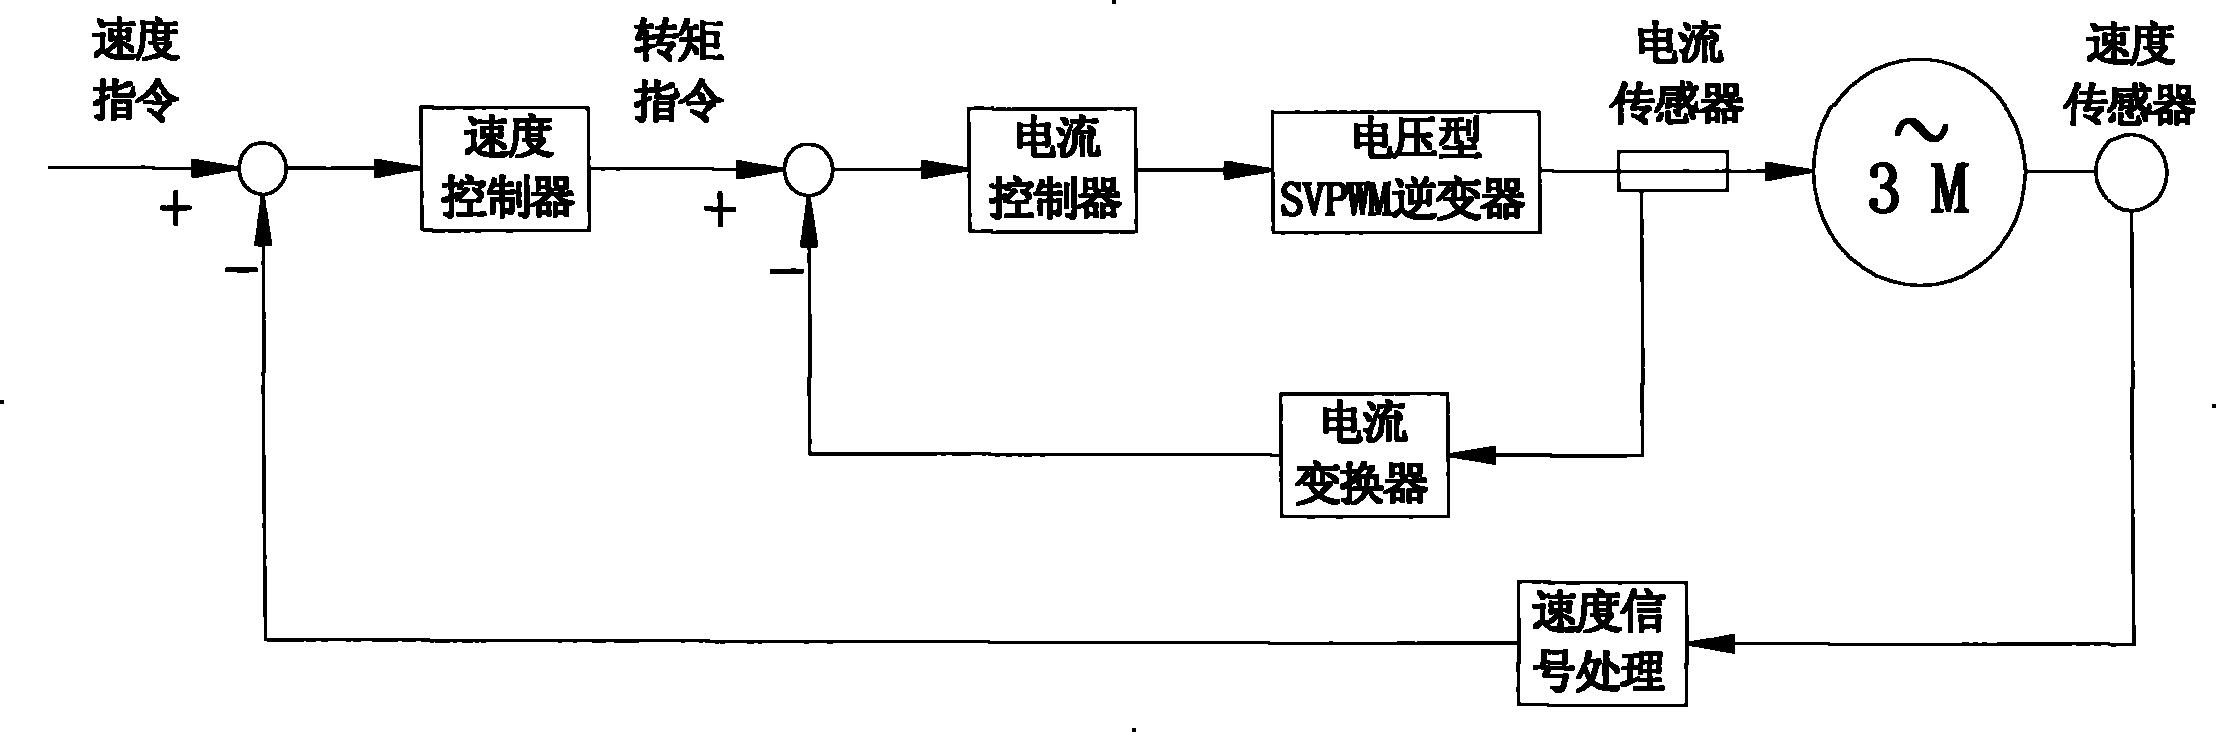 Novel synchronous electric motor and electric motor control system